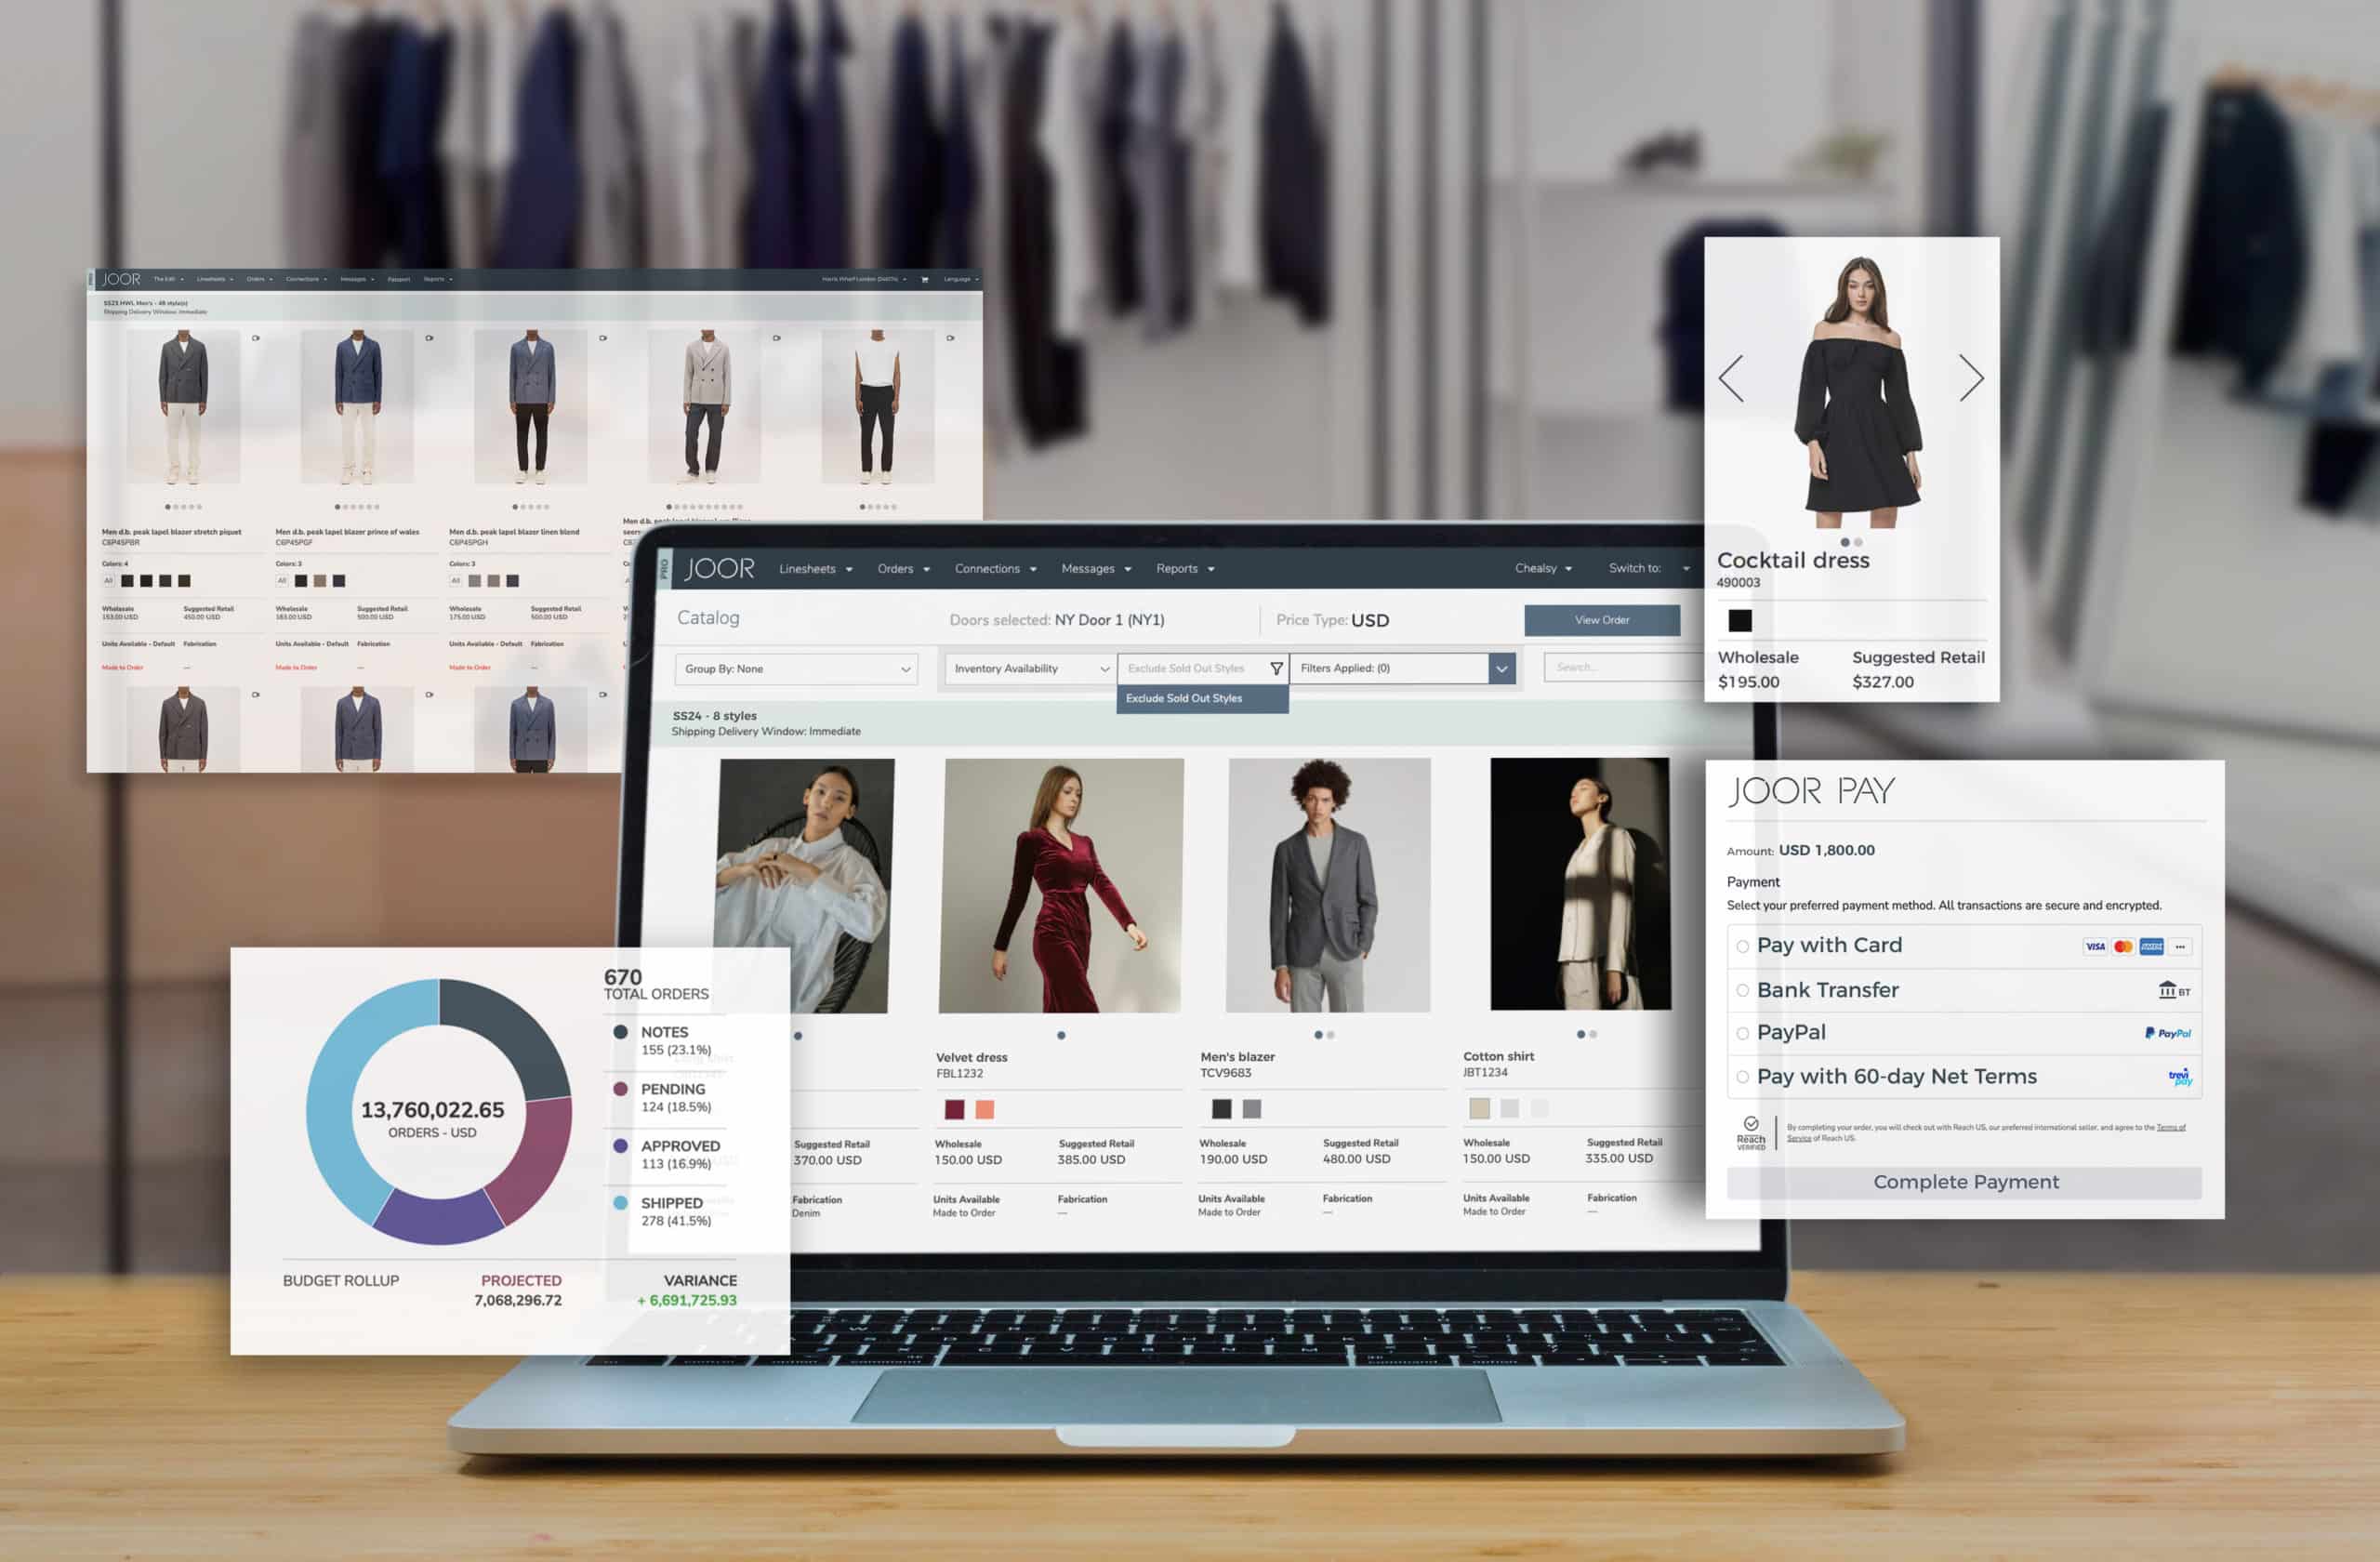 Wholesale B2B fashion platform JOOR has raised $25m in new funding, in a round led by Brightwood Capital and Tamarix Capital Partners